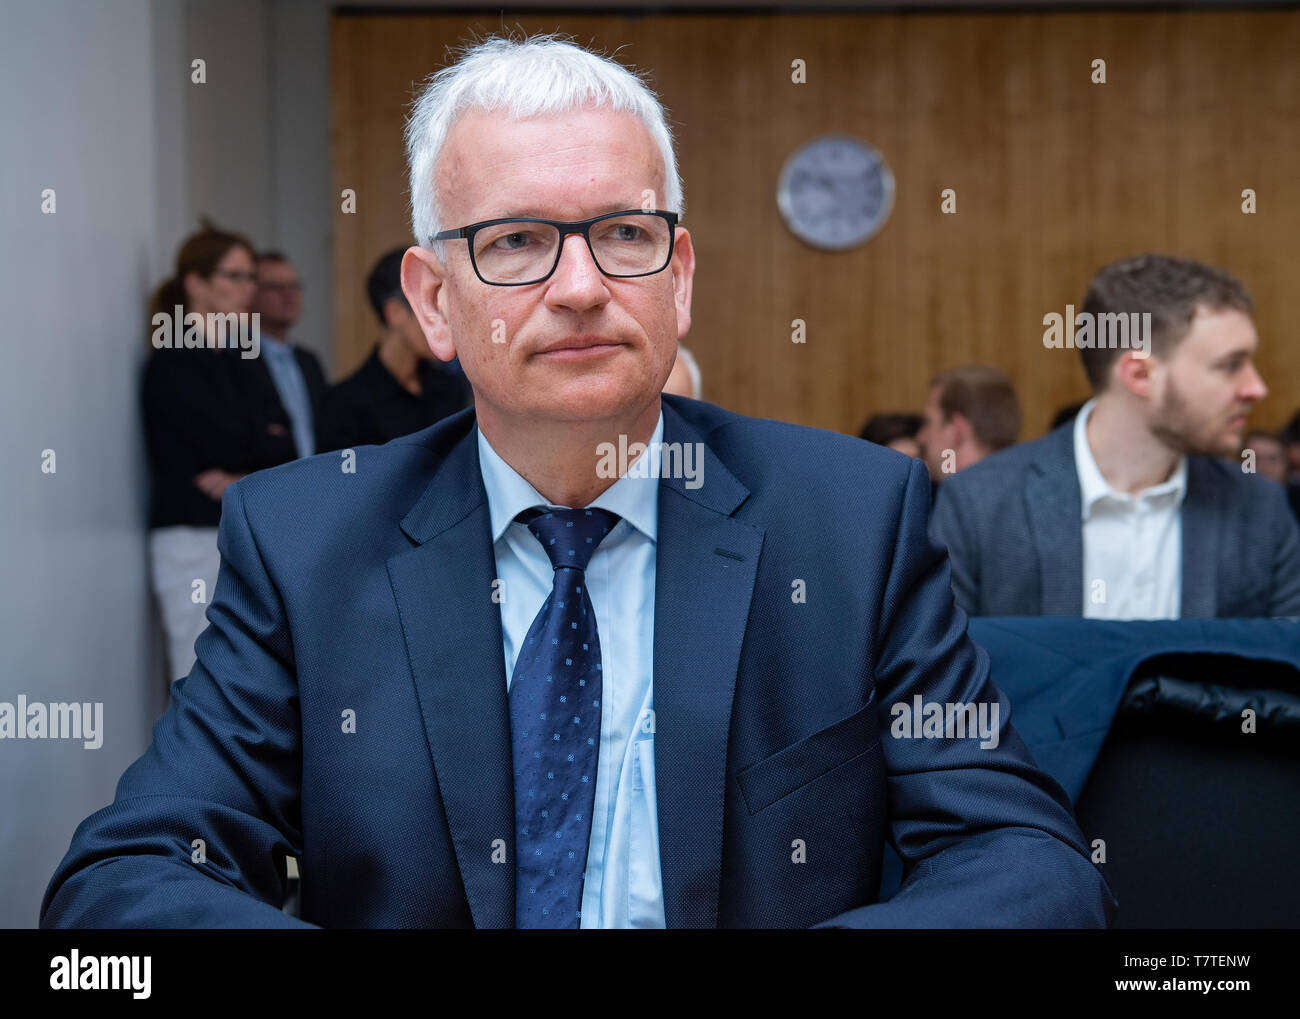 Munster, Germany. 09th May, 2019. 09 May 2019, North Rhine-Westphalia, Münster: Jürgen Resch, Managing Director of Deutsche Umwelthilfe, sits before the Higher Administrative Court in Münster. The two-day discussion session at the Higher Administrative Court of North Rhine-Westphalia deals with the complaints of Deutsche Umwelthilfe regarding driving bans for Aachen, Bonn and Cologne. The court wants to discuss with the help of experts how the measures demanded by the plaintiff for the observance of the limit values for nitrogen dioxide work. According to the OVG, for example, it is controvers Stock Photo